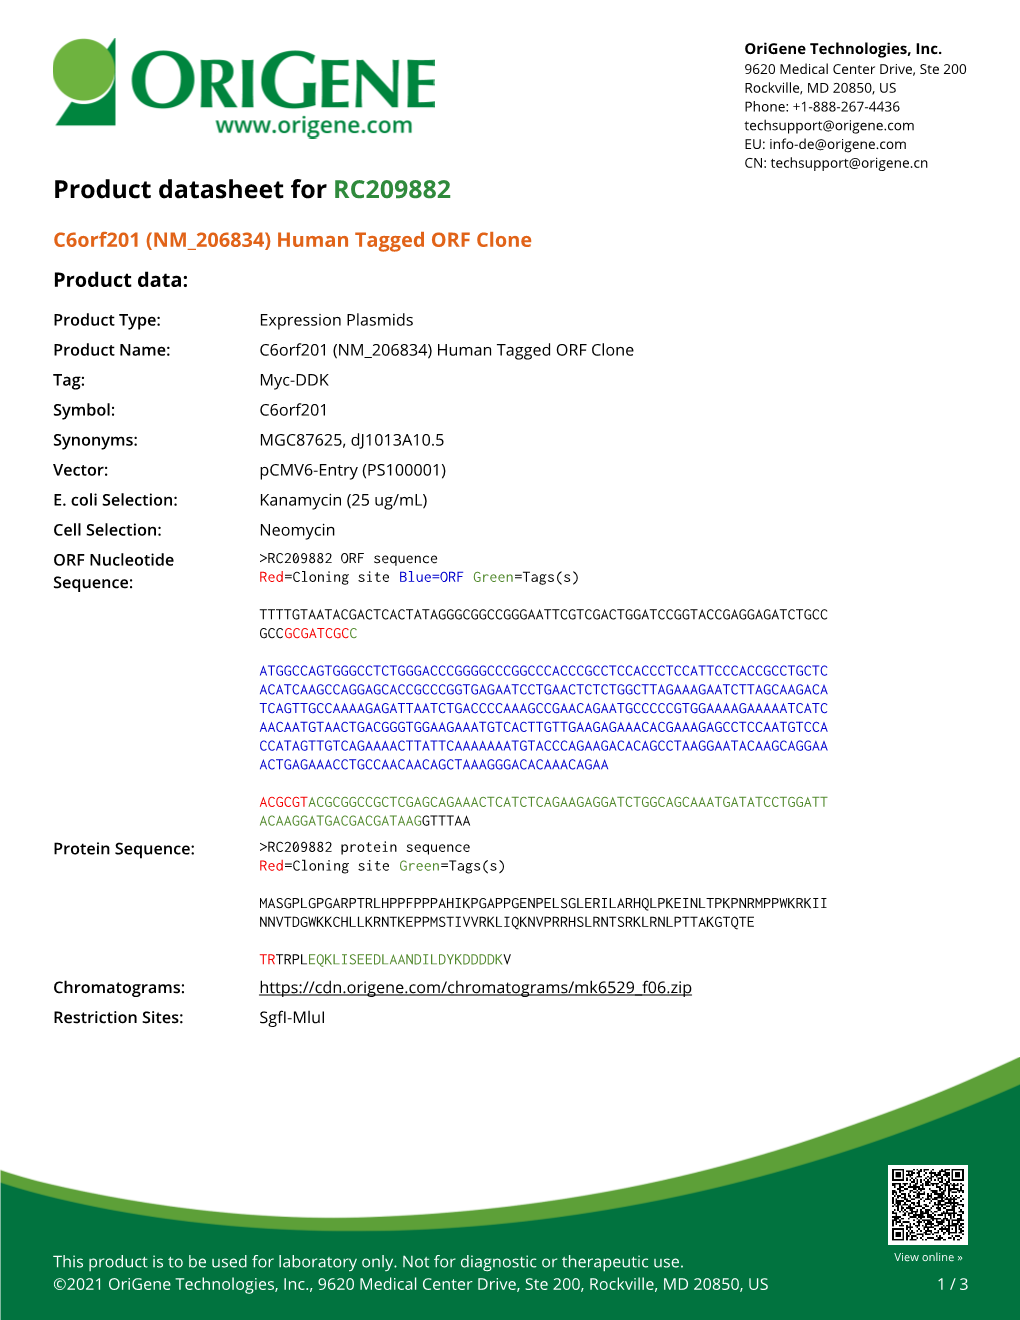 C6orf201 (NM 206834) Human Tagged ORF Clone – RC209882